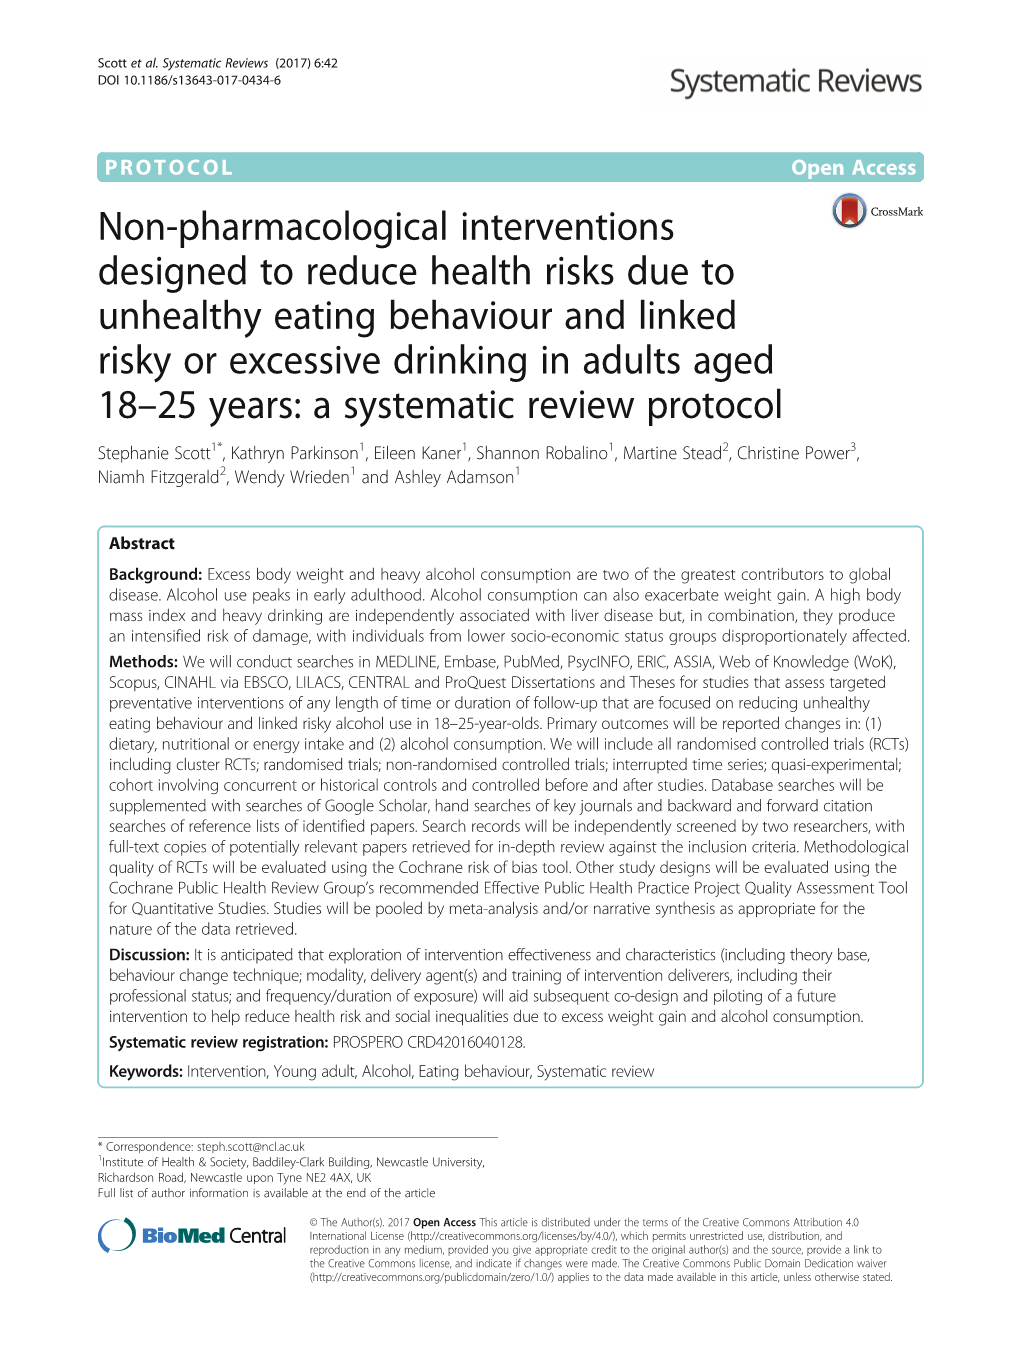 Non-Pharmacological Interventions Designed to Reduce Health Risks Due